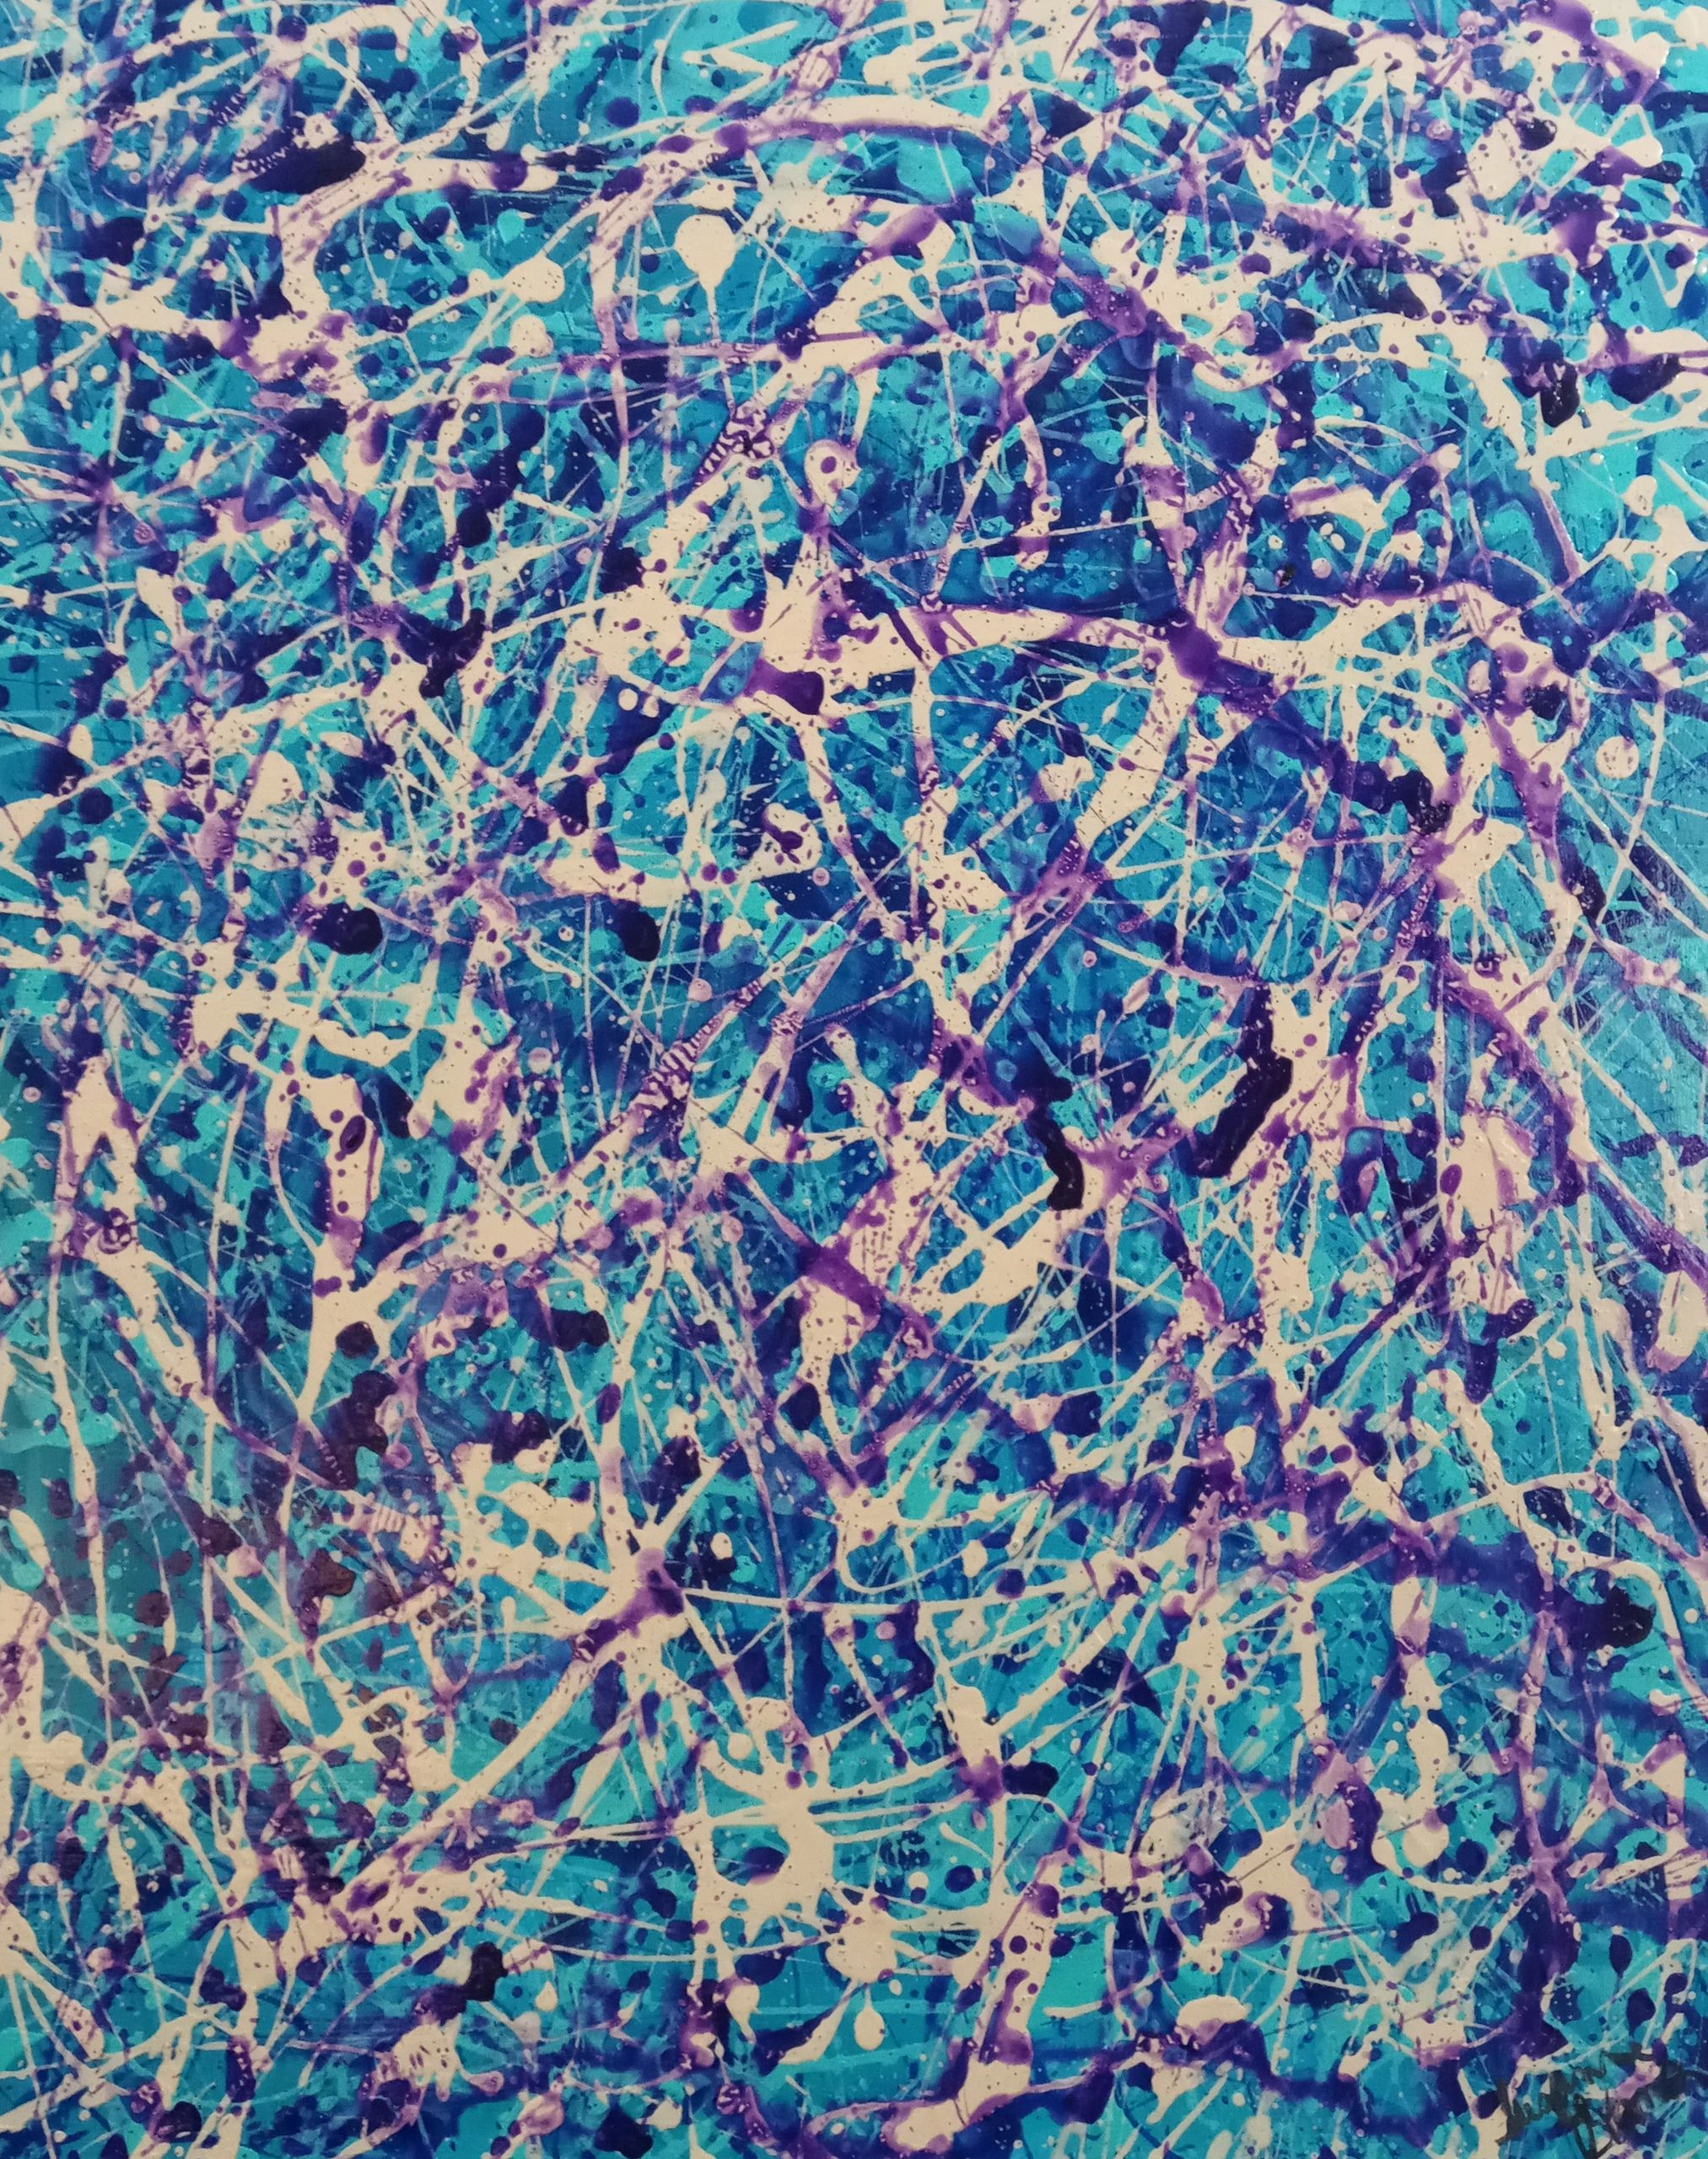 Every day we struggle one way or another.  This painting represents the tangled web we weave.